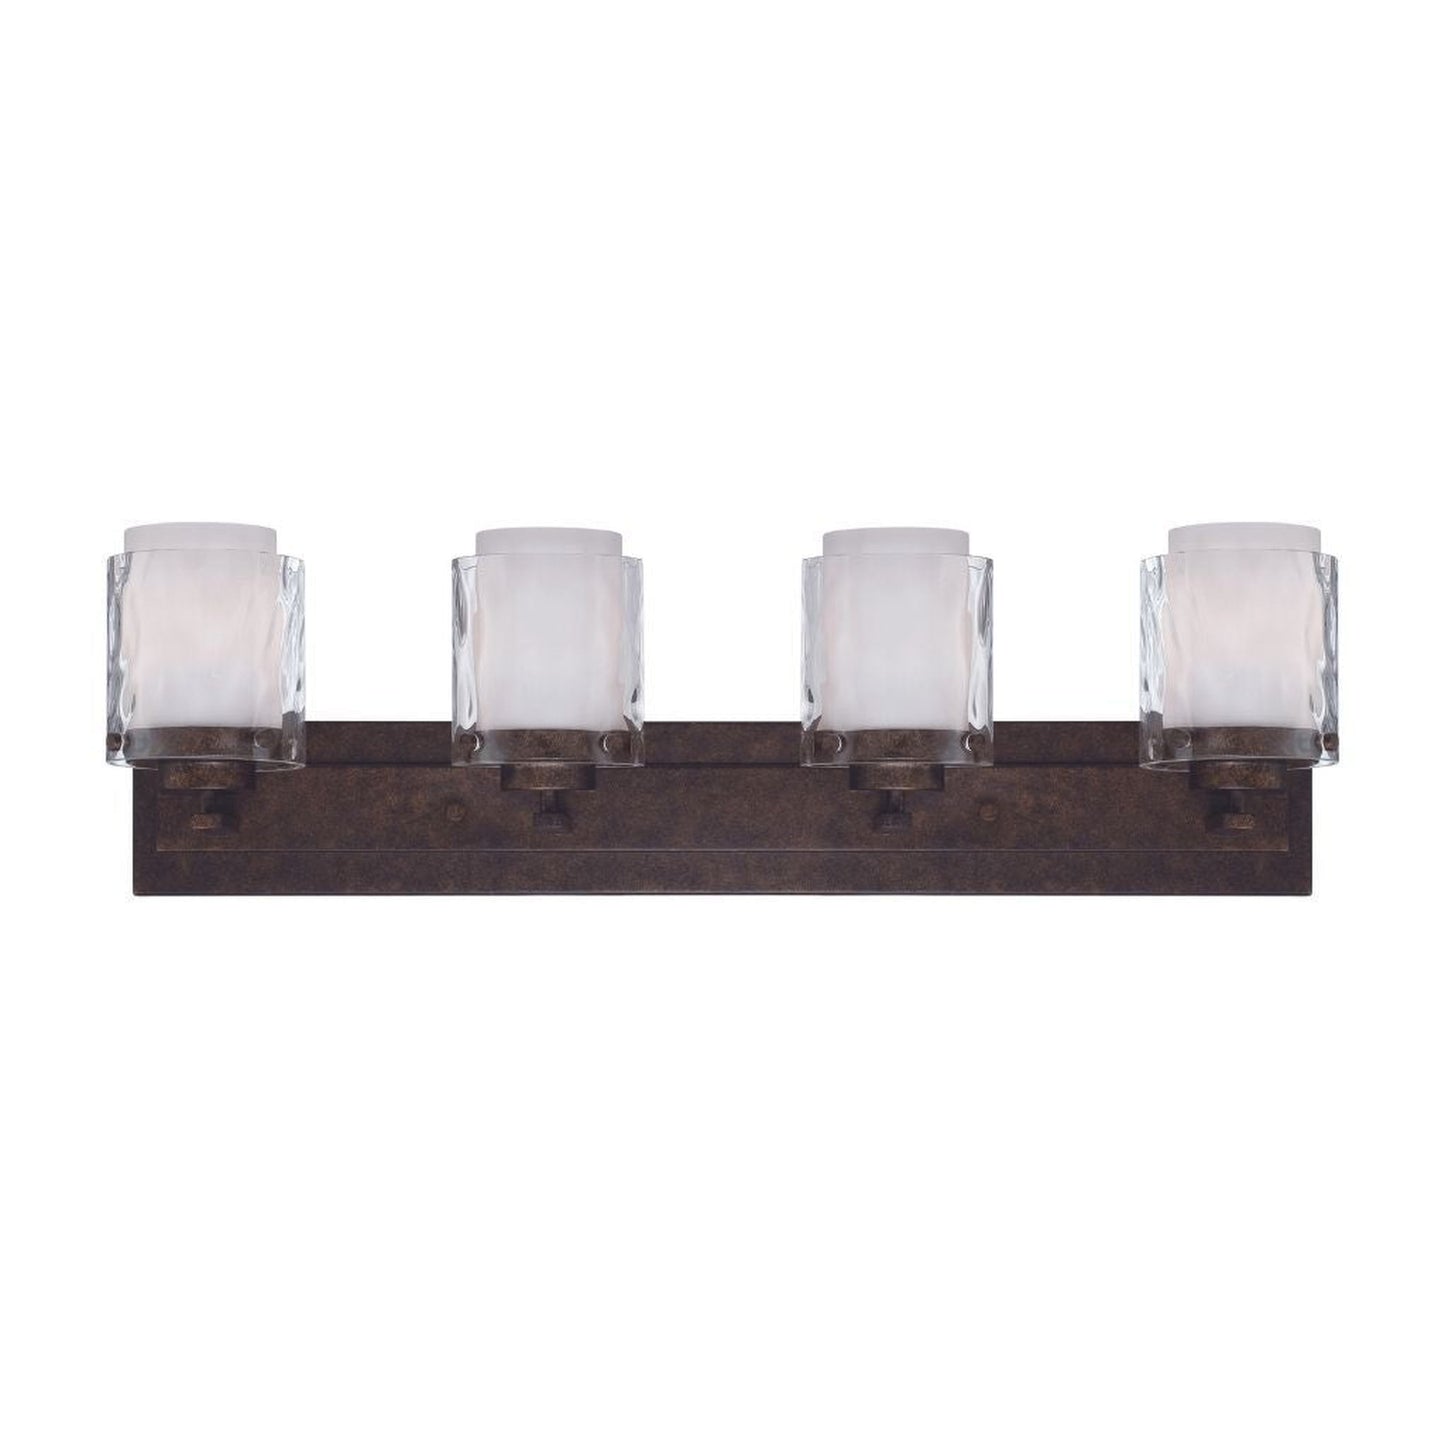 Craftmade Kenswick 33" 4-Light Peruvian Bronze Vanity Light With Clear Outer and Frosted Inner Glass Shades